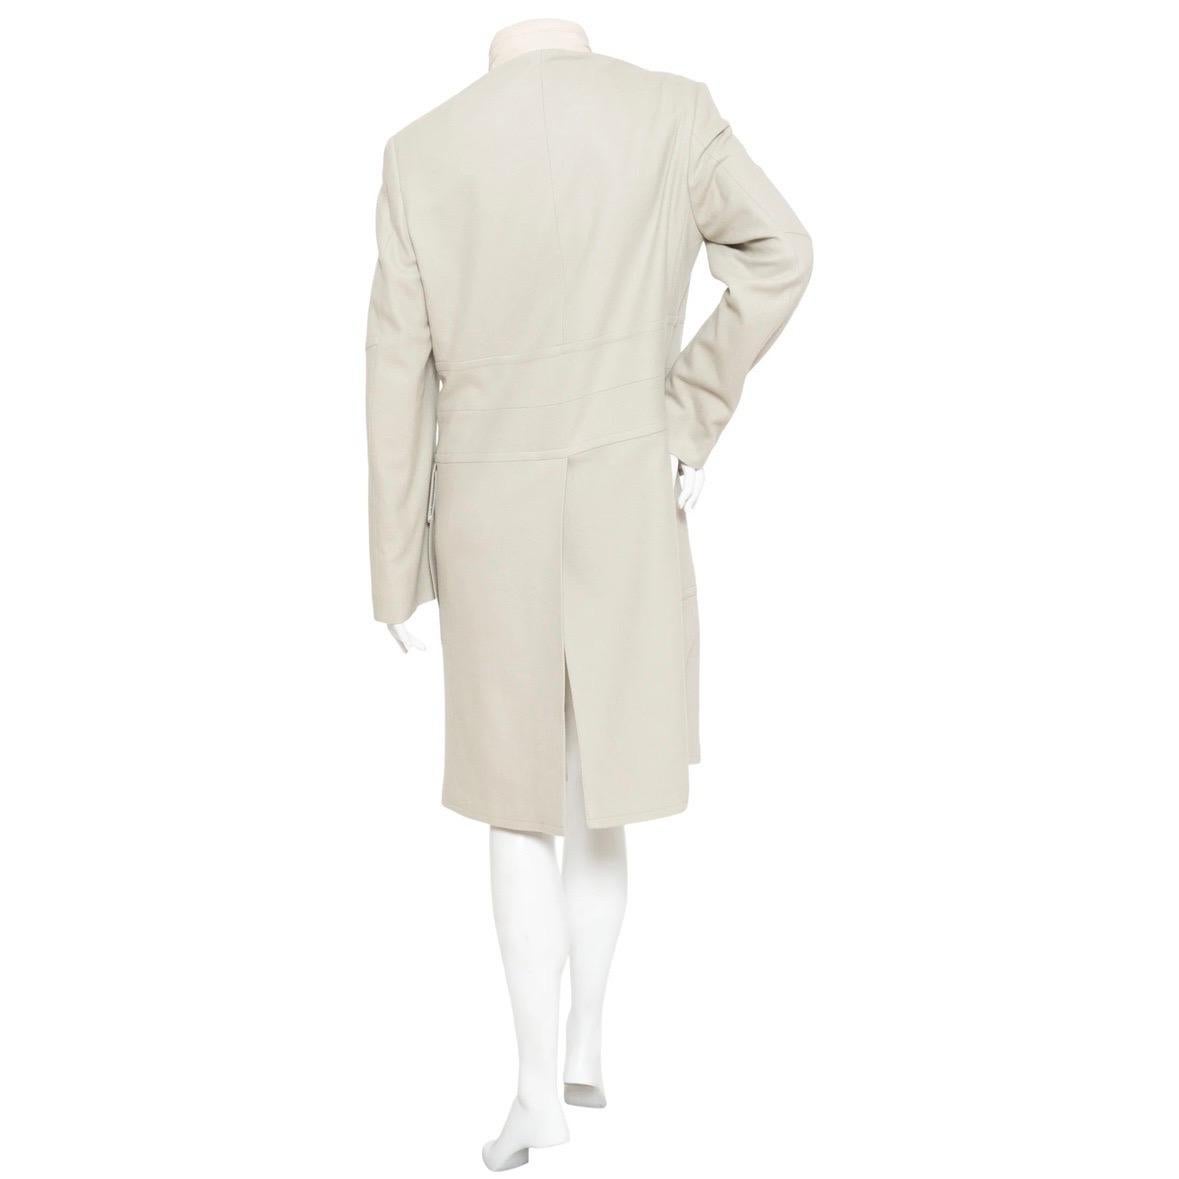 Gucci Cream Cashmere-Blend Leather Collar Coat In Excellent Condition For Sale In Los Angeles, CA